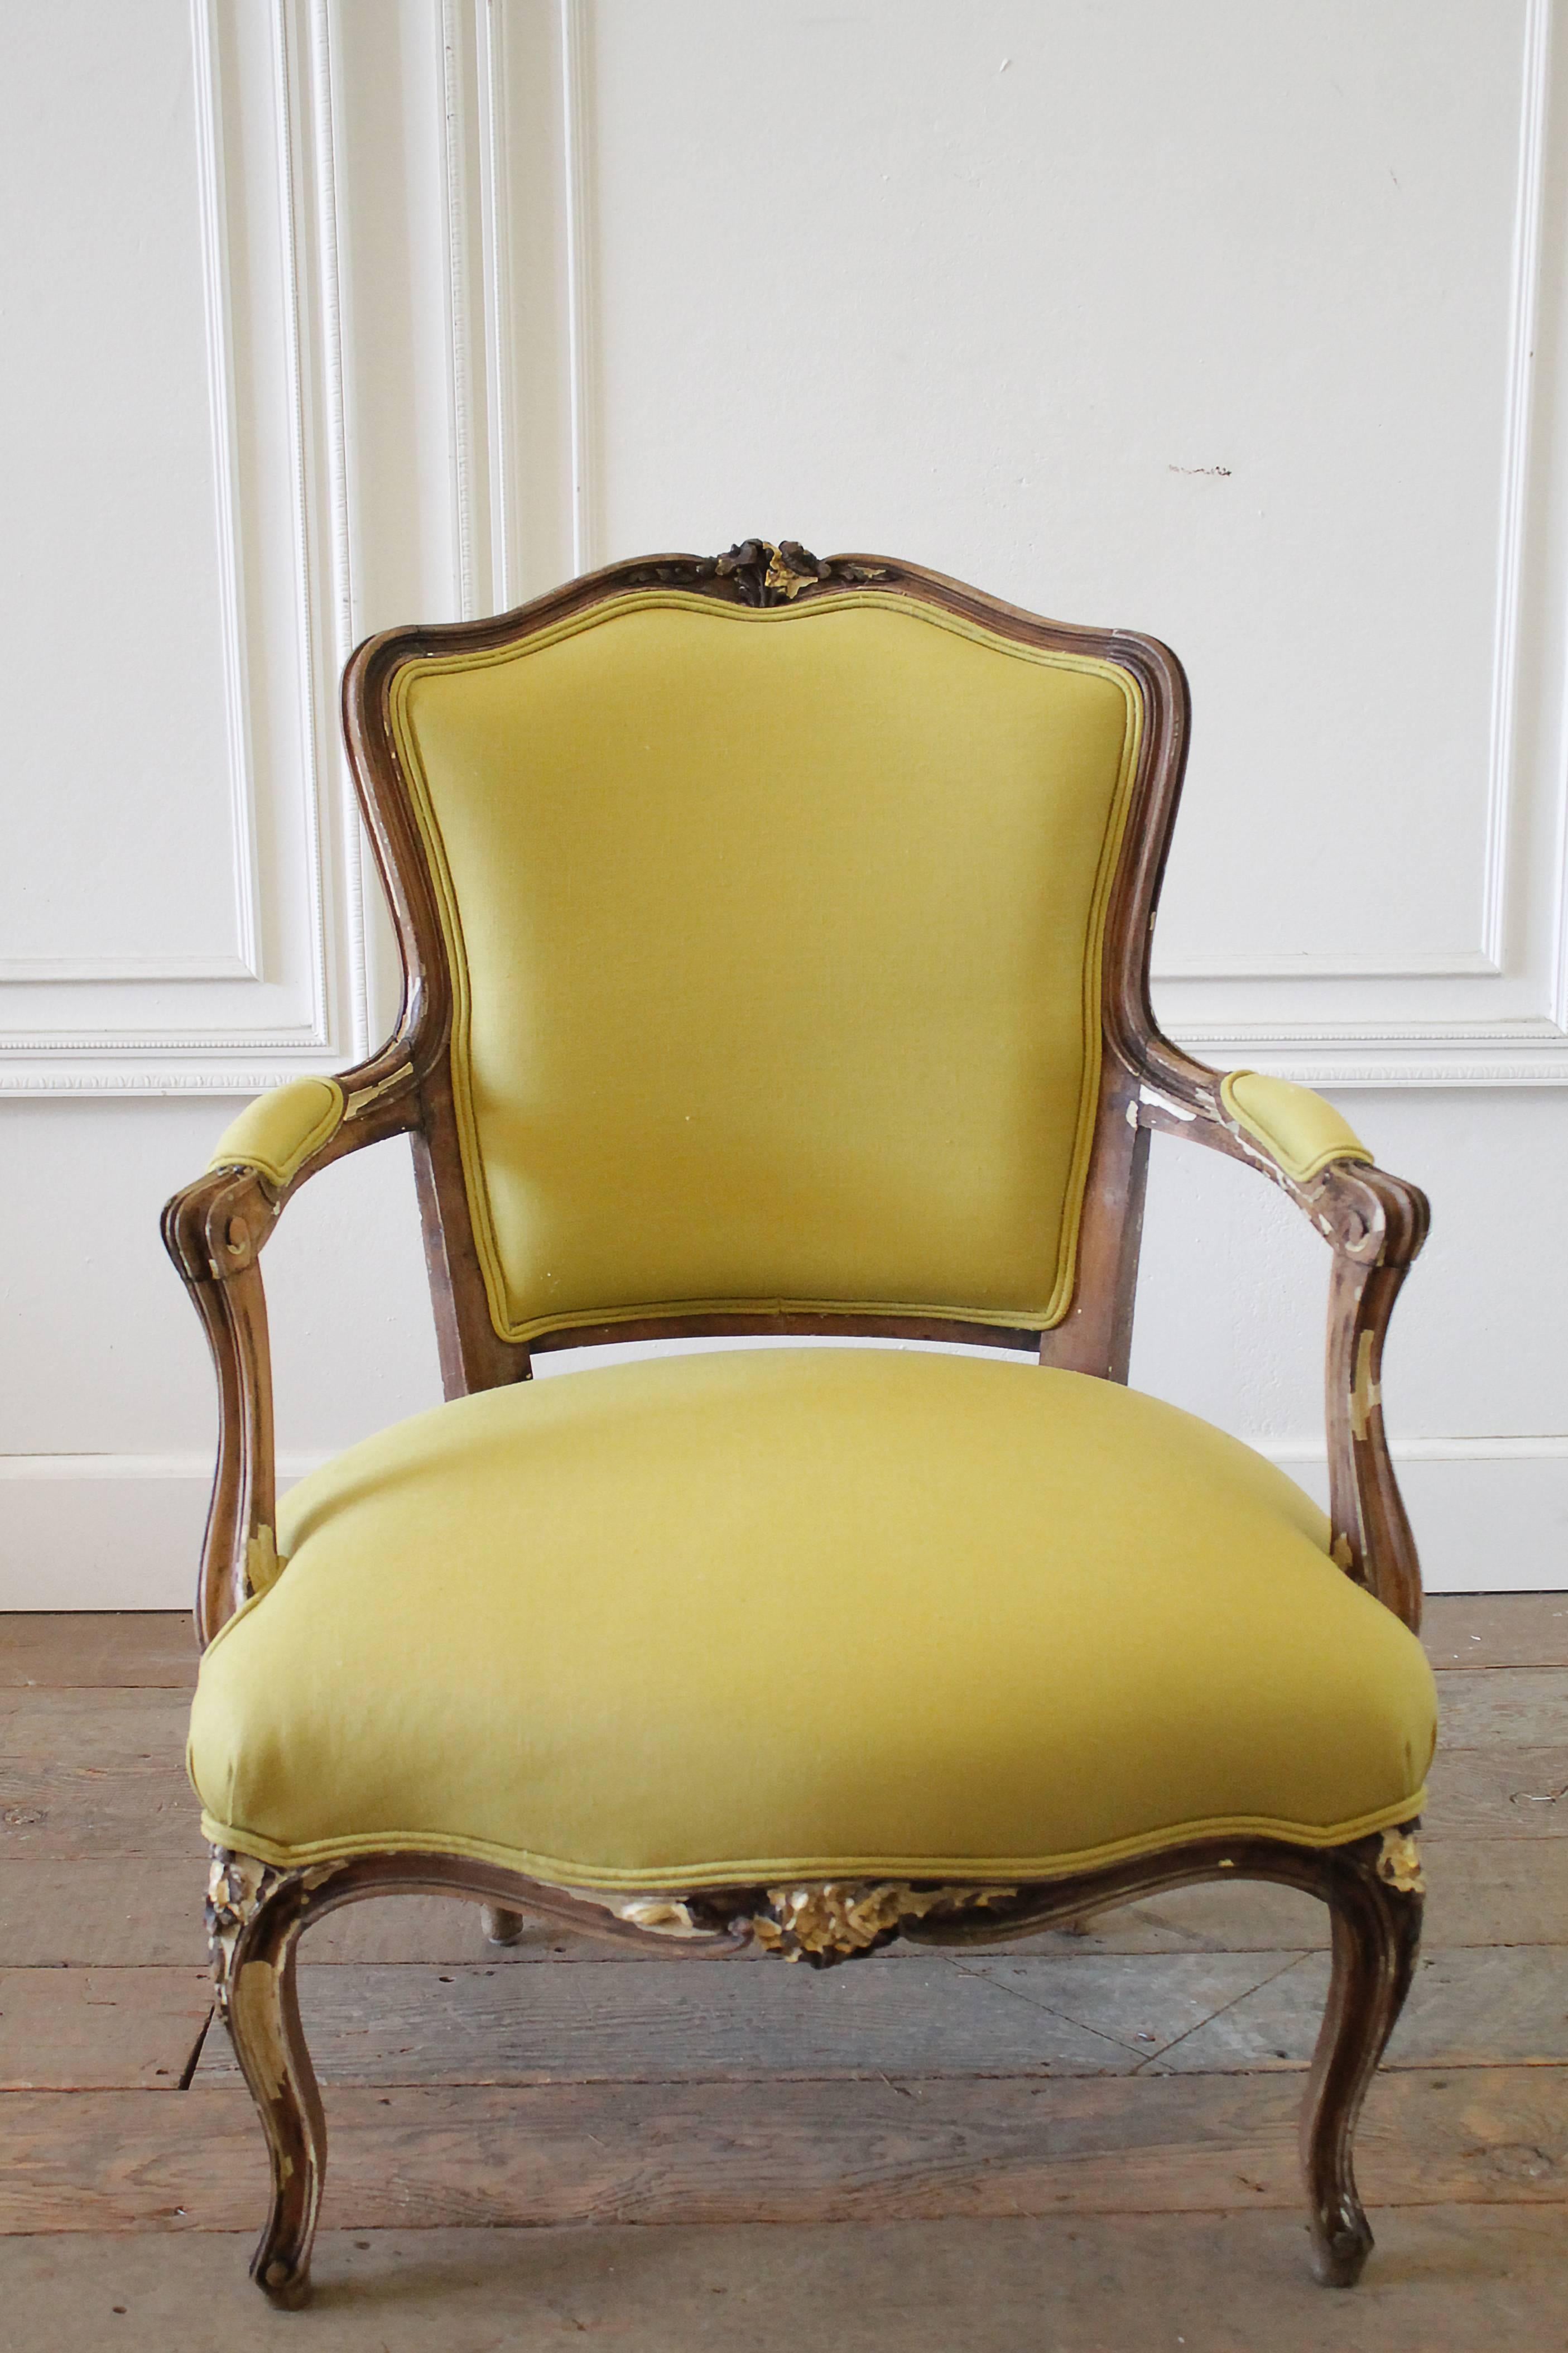 19th century Louis XV style fauteuil in chartreuse linen
Beautiful antique frame, with chippy painted patina, exposing the wood frame, and traces of gilt.
Measures: 26” W x 35” H x 26” D,
seat H 17” x seat D 20” x arm H 23”.